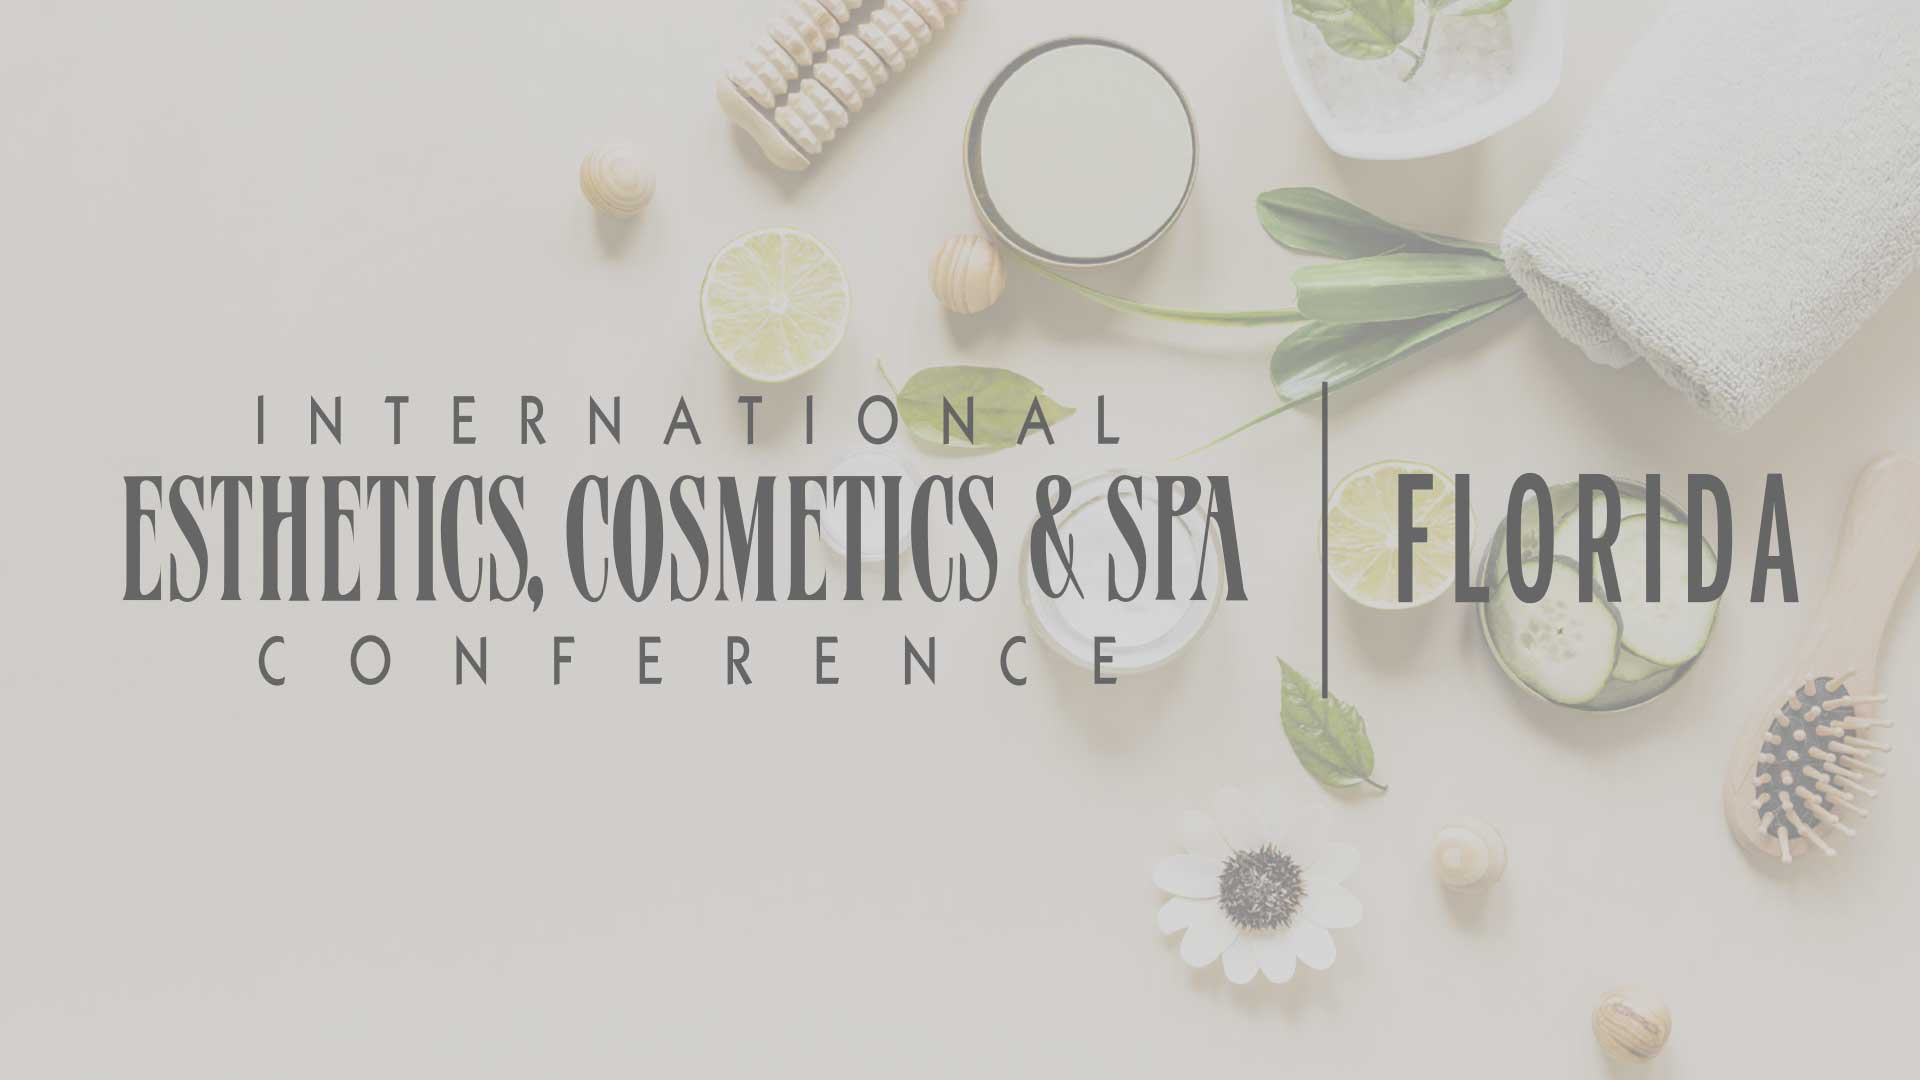 See us at the International Esthetics Cosmetics & Spa Conference Oct